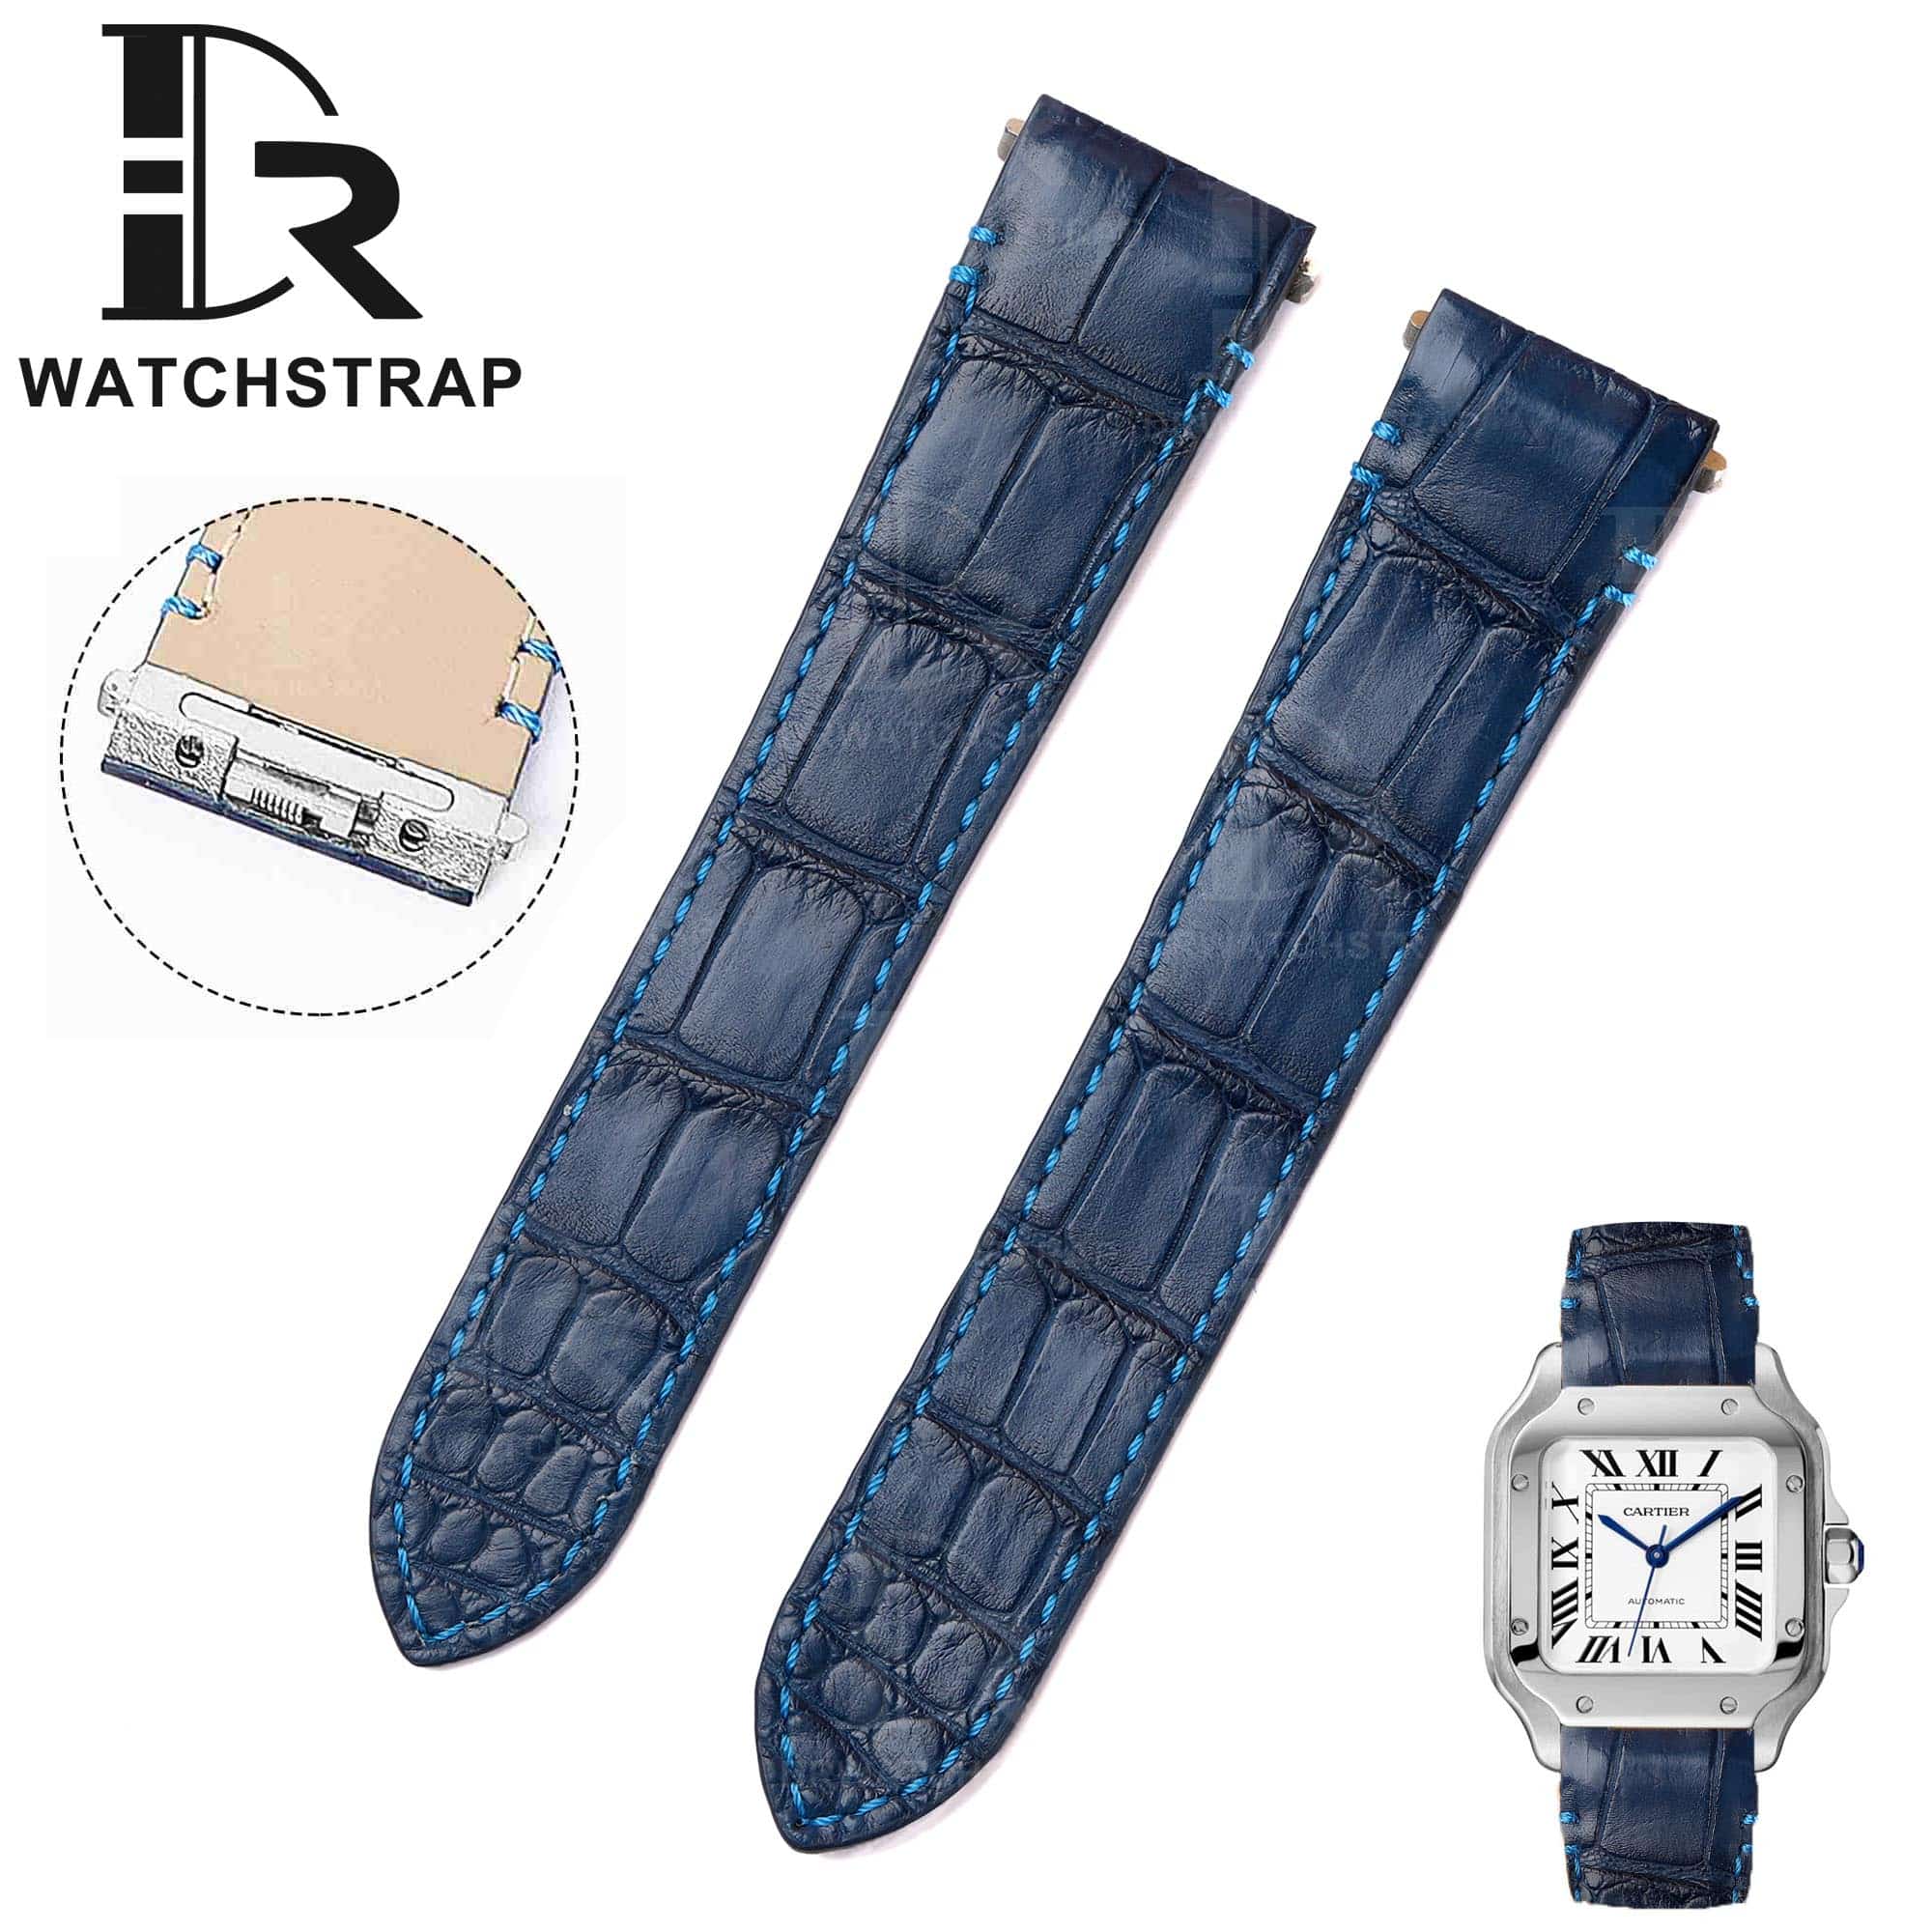 Cartier Santos quickswitch leather watch strap replacement with an interchangeable system and red black brown blue green orange and more colors leather watchbands available for men's women's Cartier Santos Larga Medium watches.